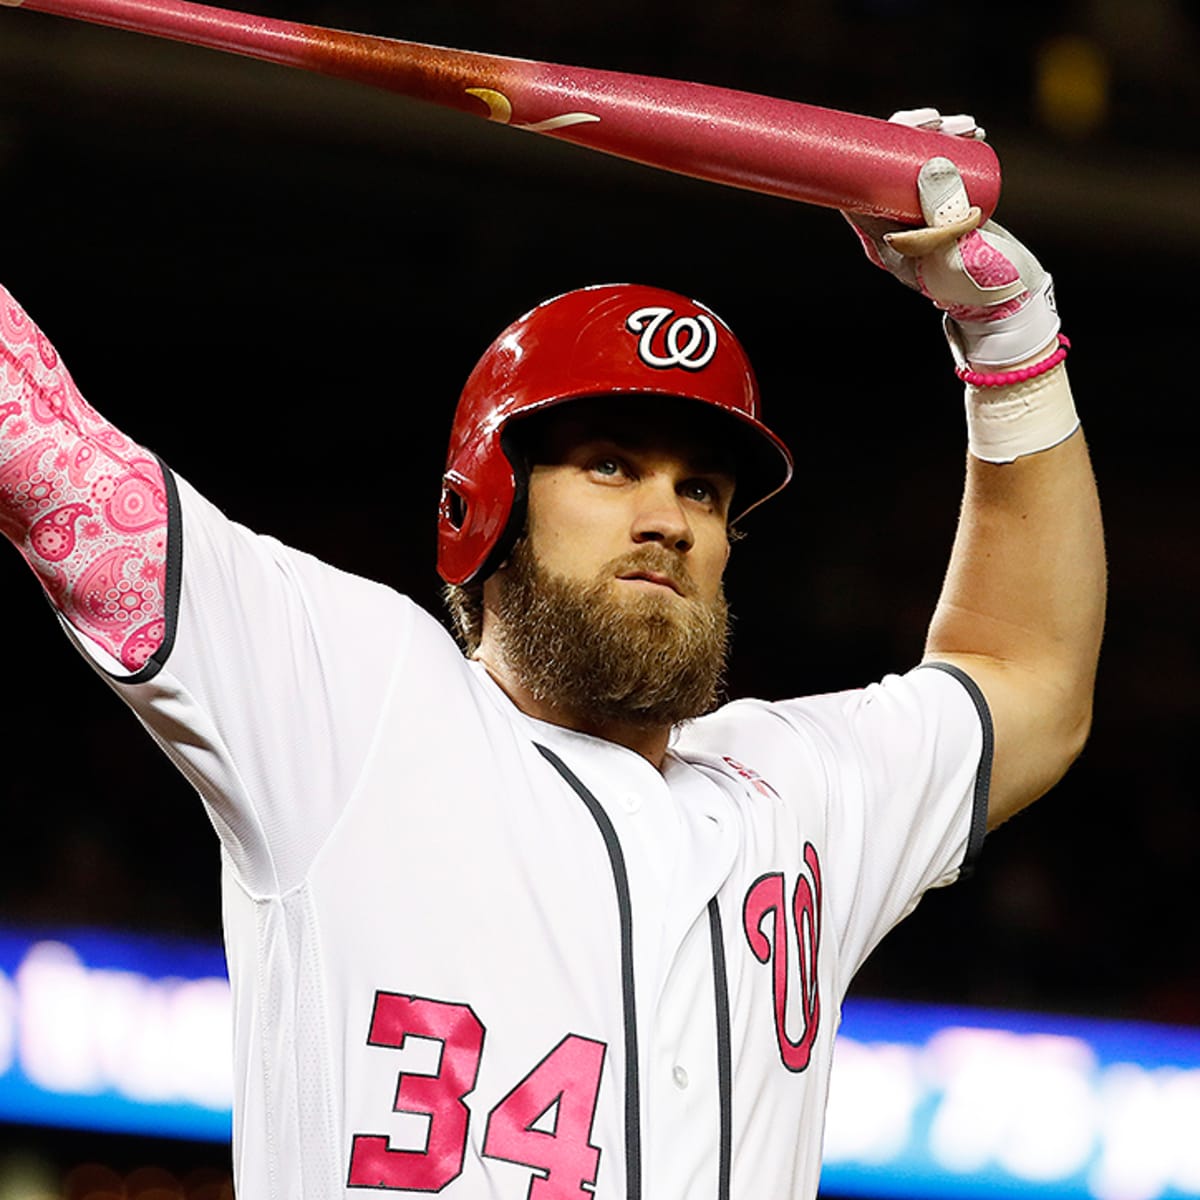 Bryce Harper's 2018 signing won't mean much in long run - Sports Illustrated